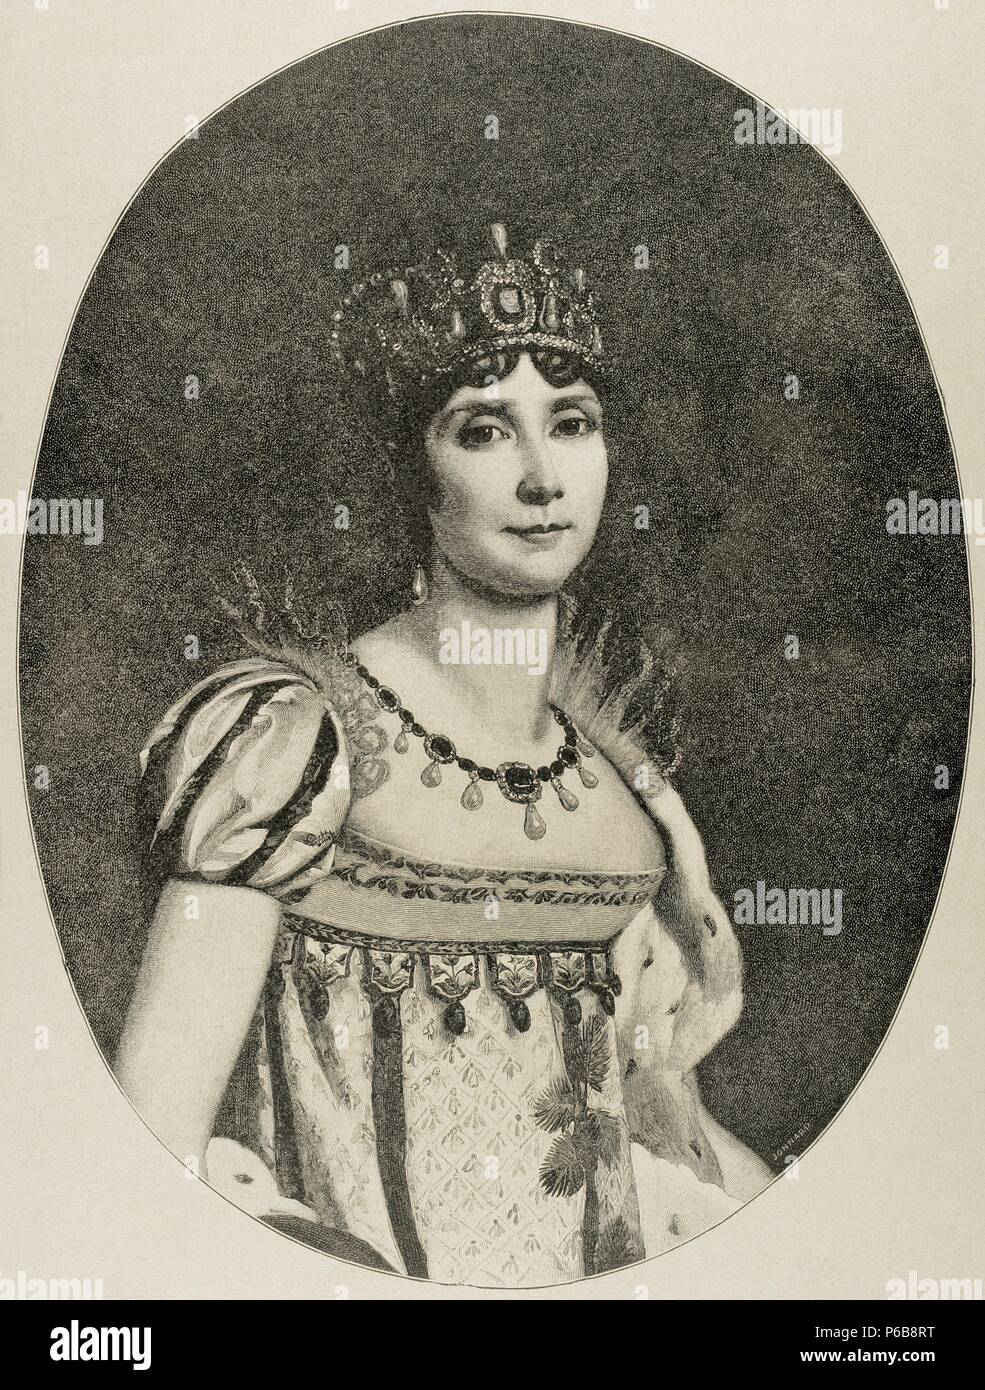 Josephine de Beauharnais (1763-1814). First wife of Napoleon I and Empress of the French. Engraving by Jonnard. The Iberian Illustration, 1888. Stock Photo